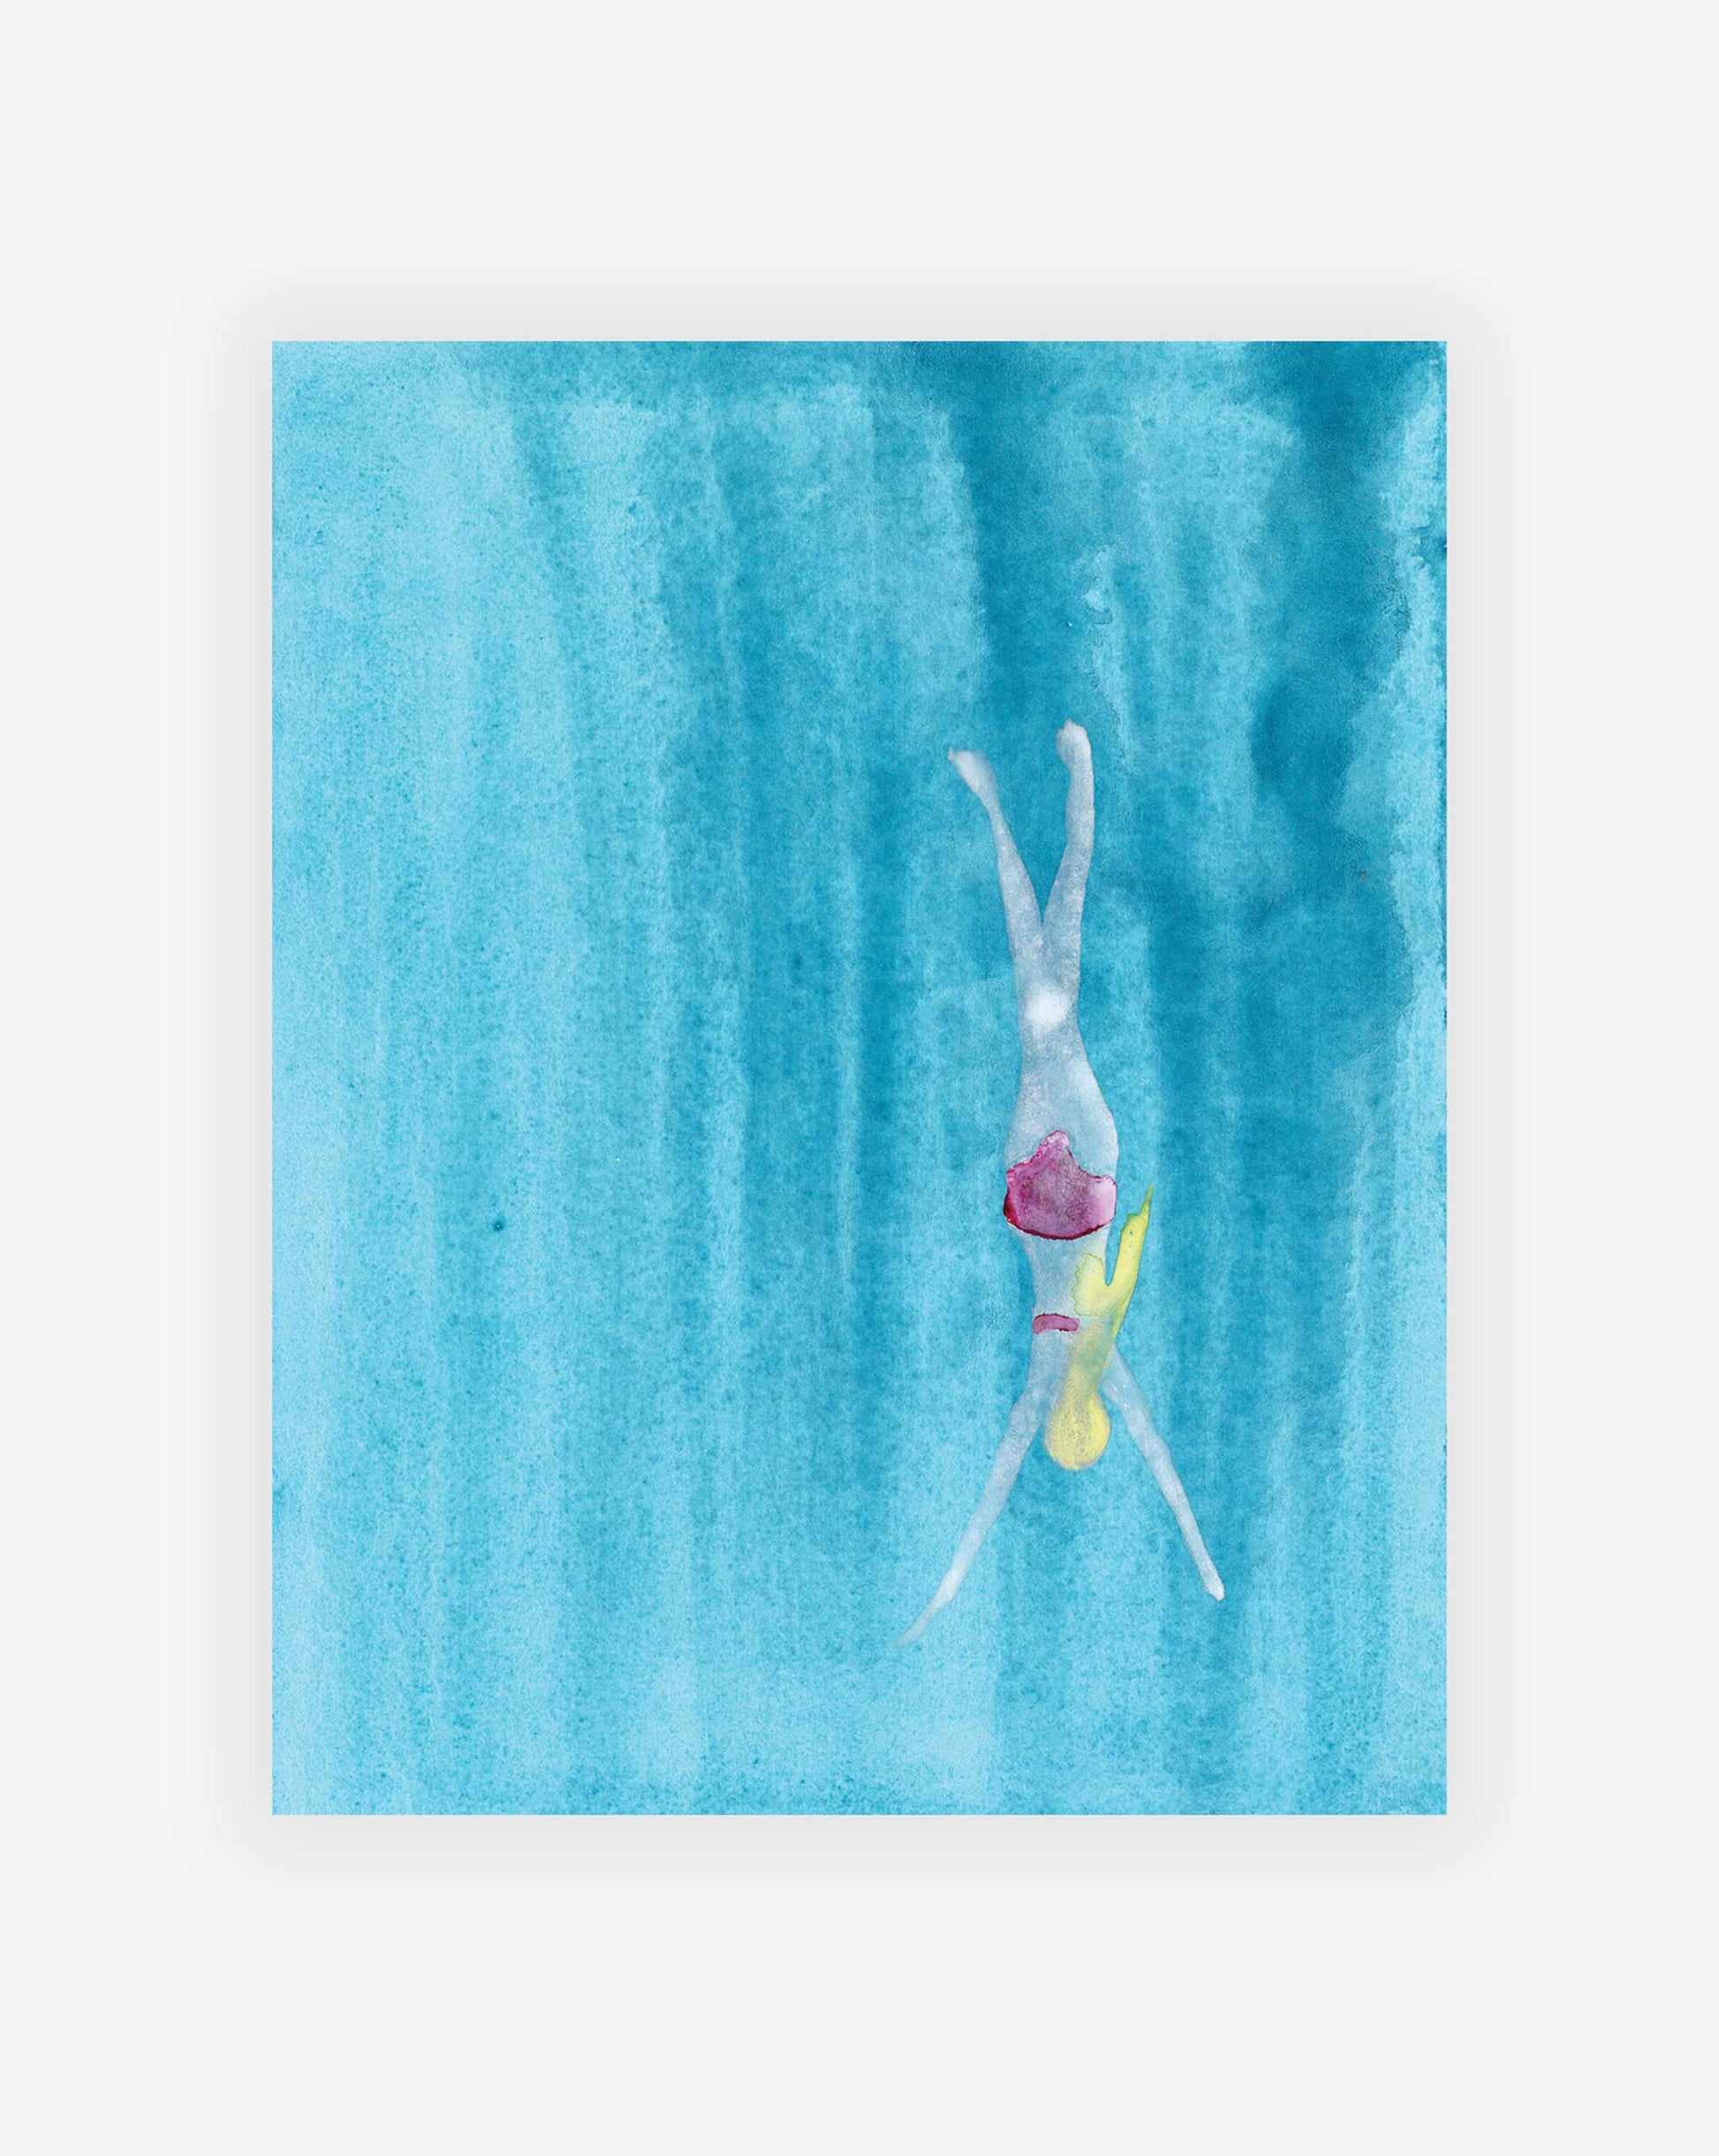 A watercolor painting by Eskayel founder Shanan Campanaro depicts a person swimming underwater. The view is from above, showing the swimmer moving forward in a blue aquatic environment. This piece exemplifies her unique approach to creating original artworks and is titled "Butterfly Stroke Print.